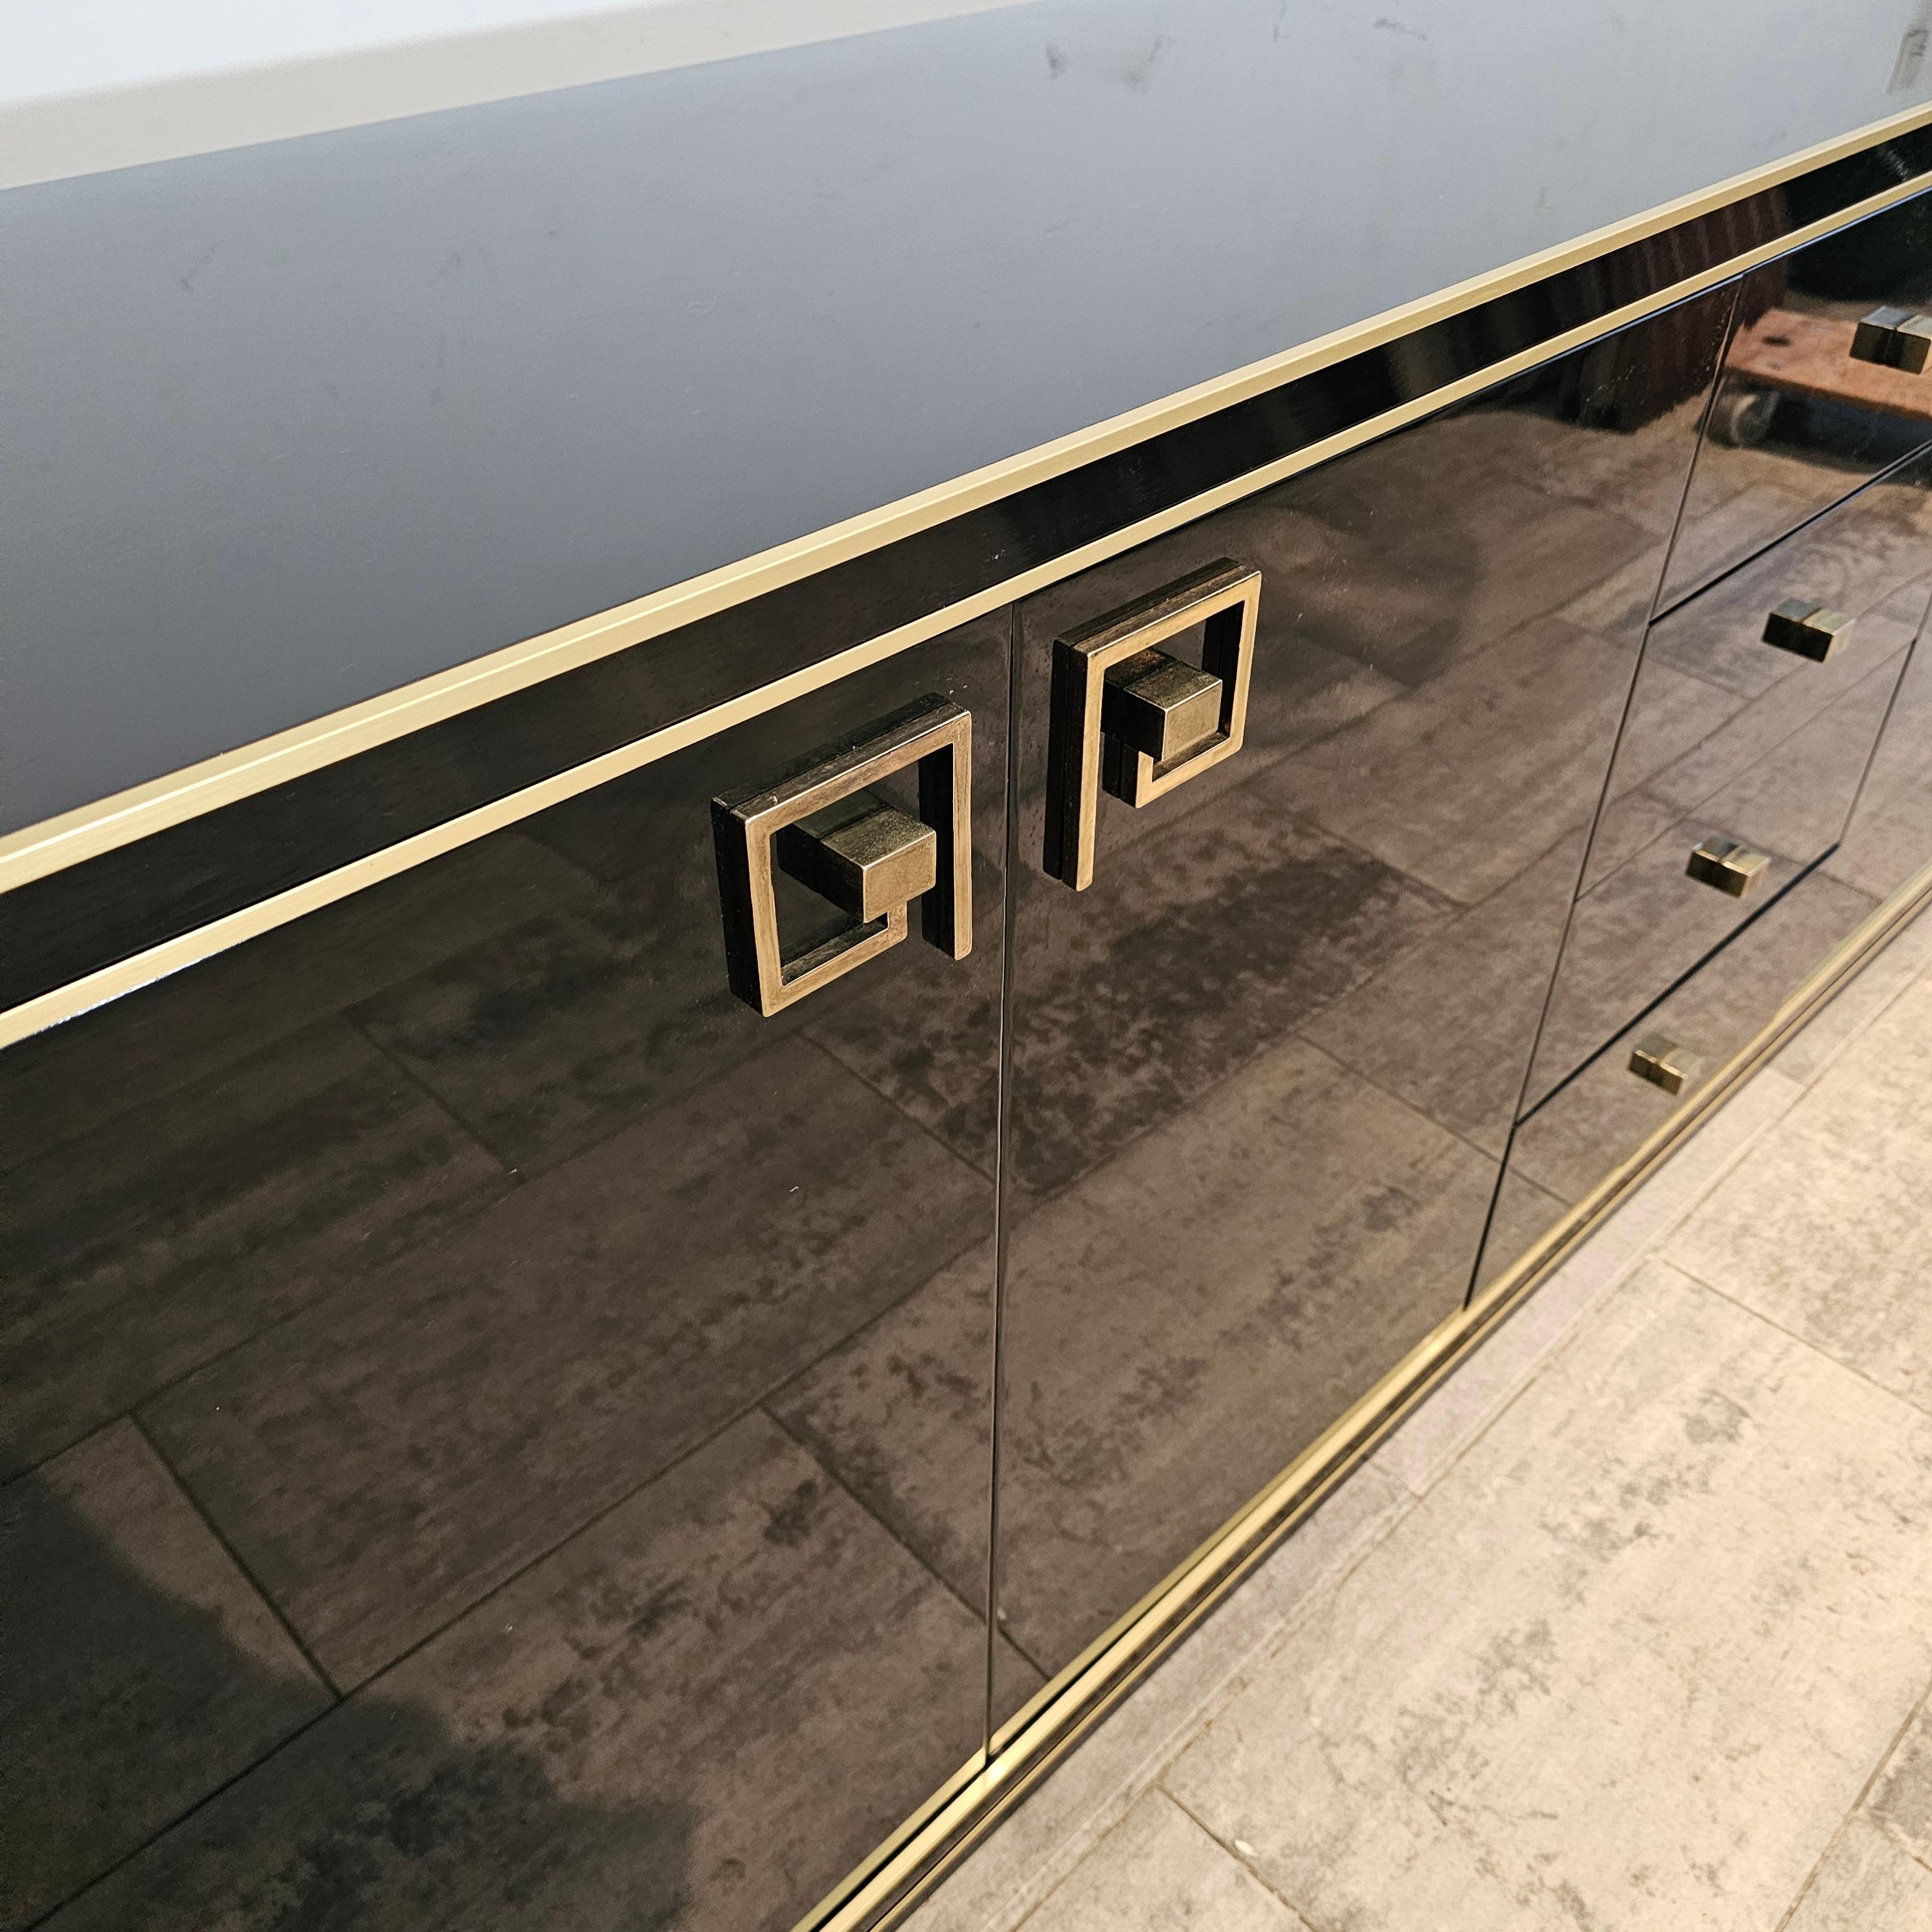 Hollywood Regency Black Lacquered Credenza With Brass Details, Style of 